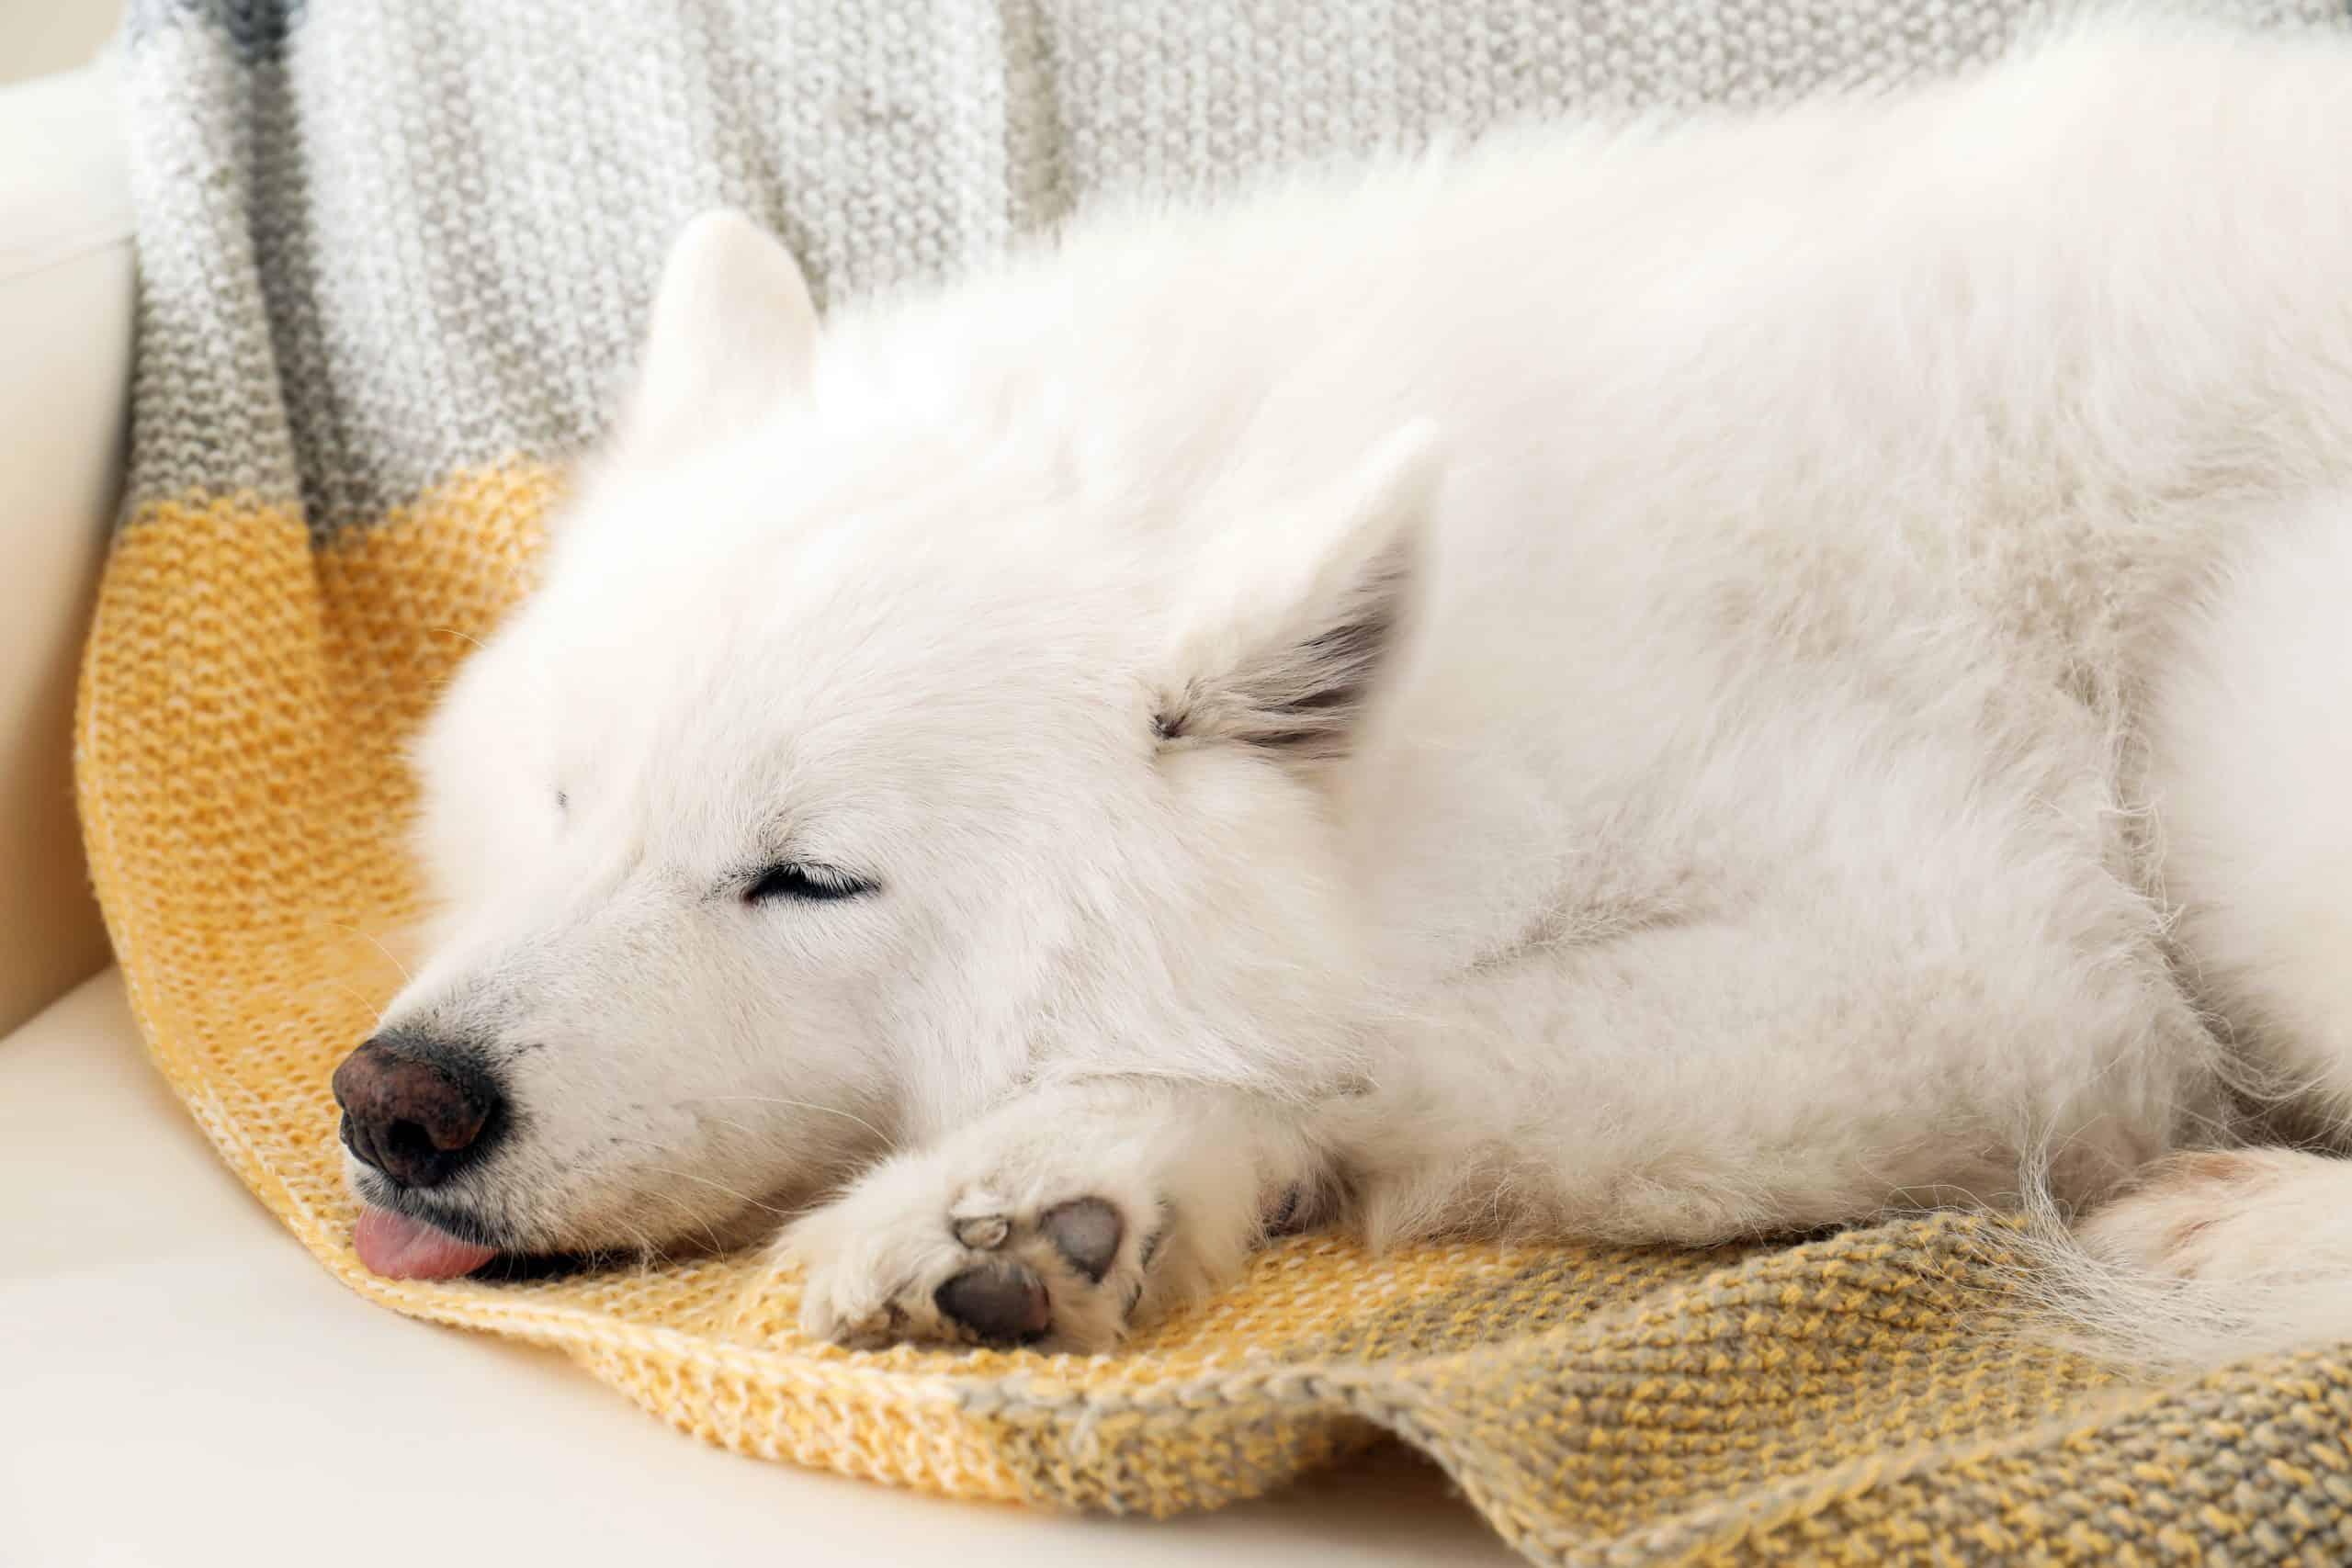 Why Does My Dog Knead And Bite Blanket?